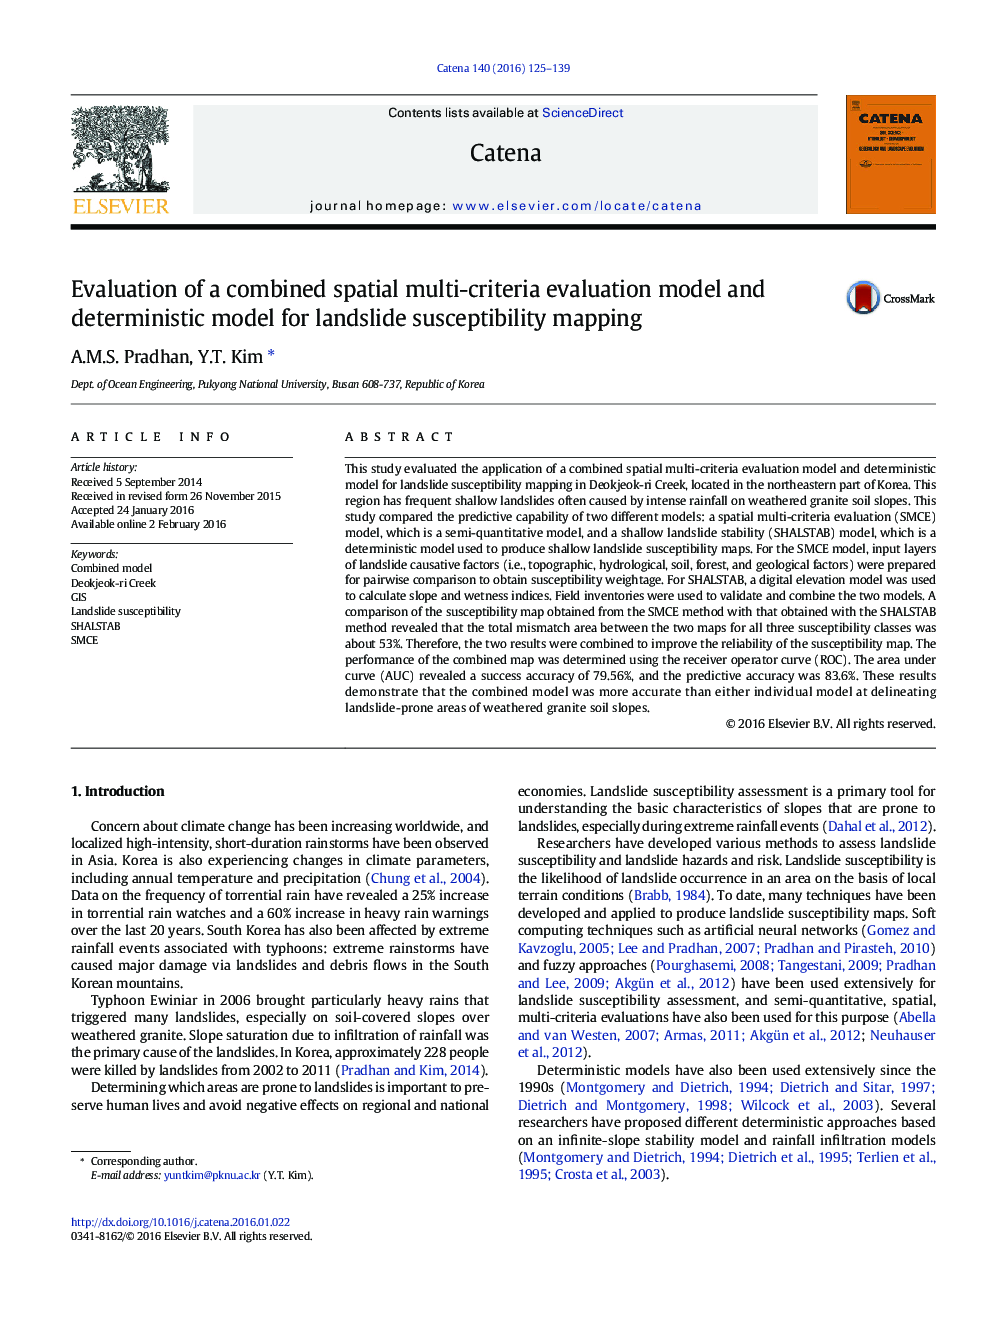 Evaluation of a combined spatial multi-criteria evaluation model and deterministic model for landslide susceptibility mapping